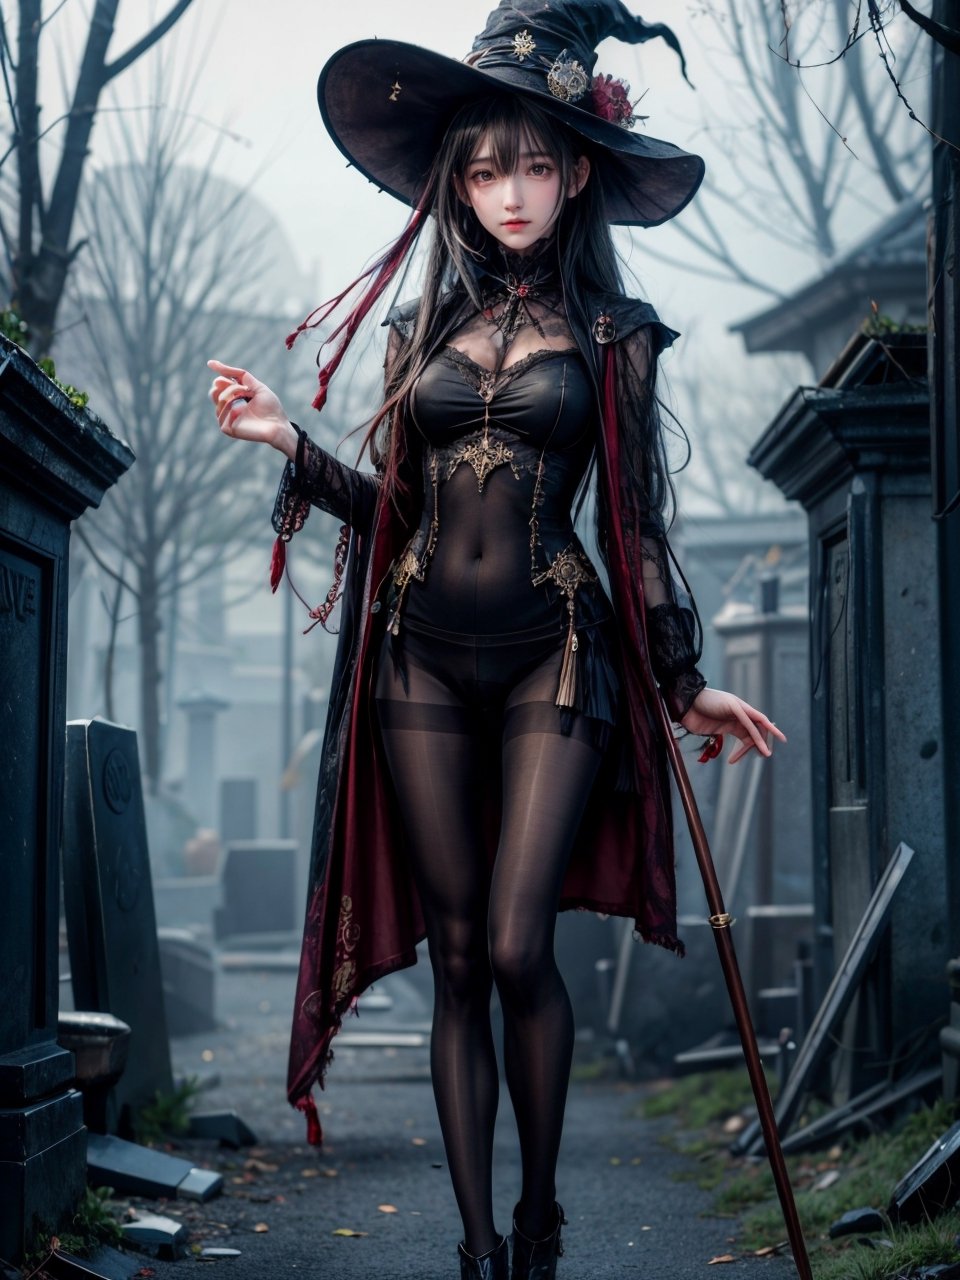 ((((((Whole_body_from_far_away)))))), (((pantyhose))), A hauntingly beautiful illustration of a witch standing in a spooky graveyard, The witch should be portrayed with fine details and realistic shading. The artwork should be in a high resolution and digitally painted by renowned artists like Luis Royo and Jasmine Becket-Griffith. The overall composition should evoke a sense of mystery and enchantment.